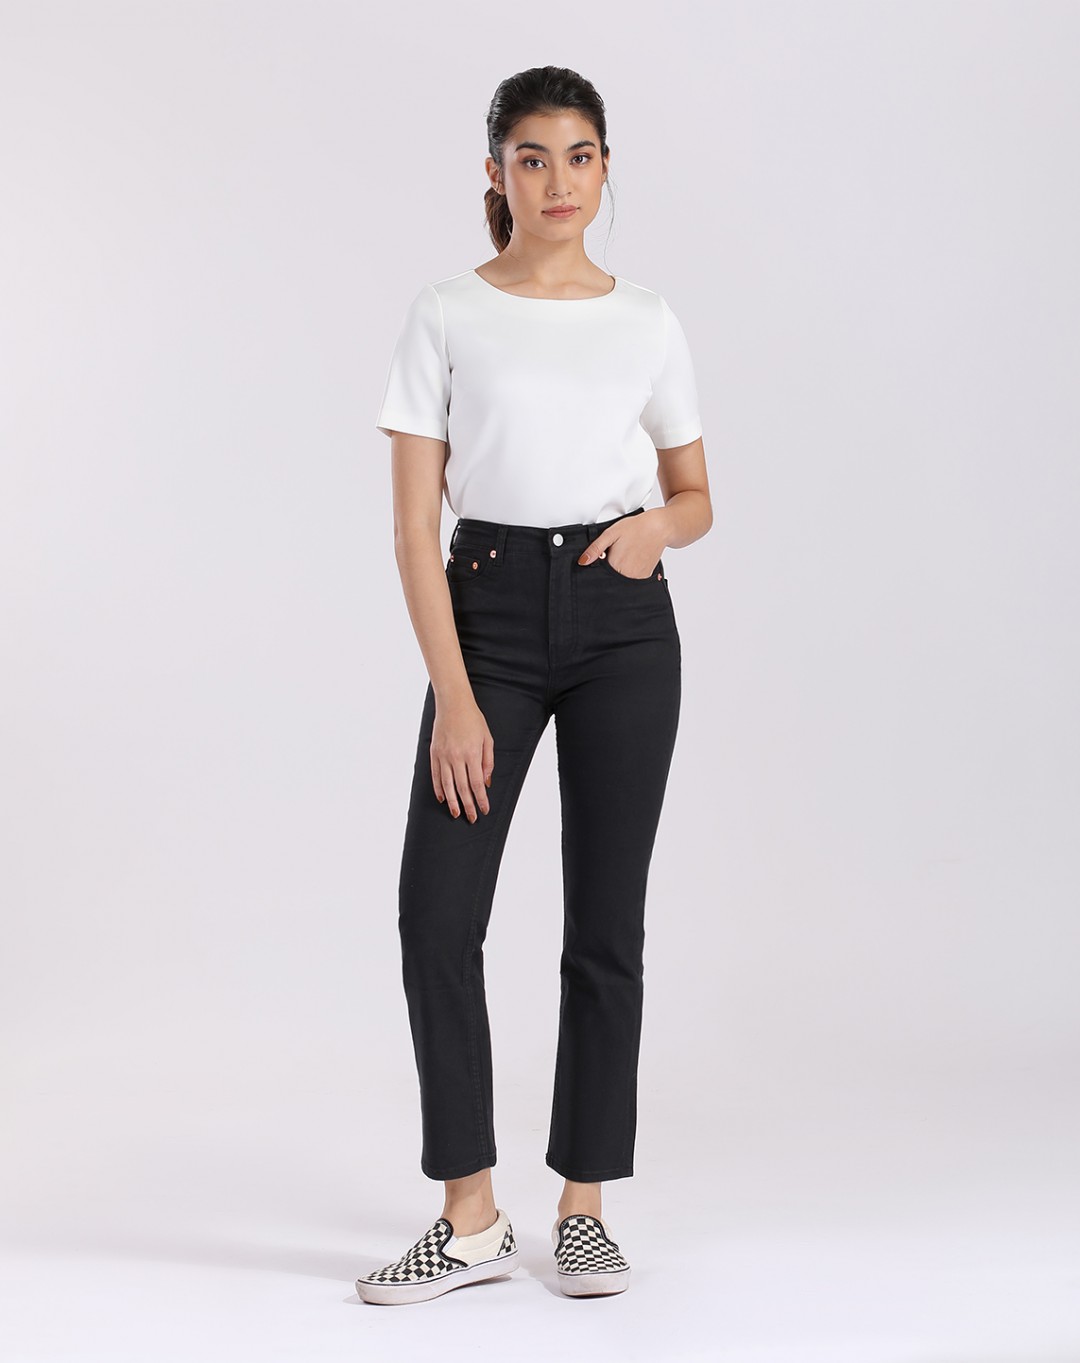 LICOLYN SKINNY FLARE JEANS